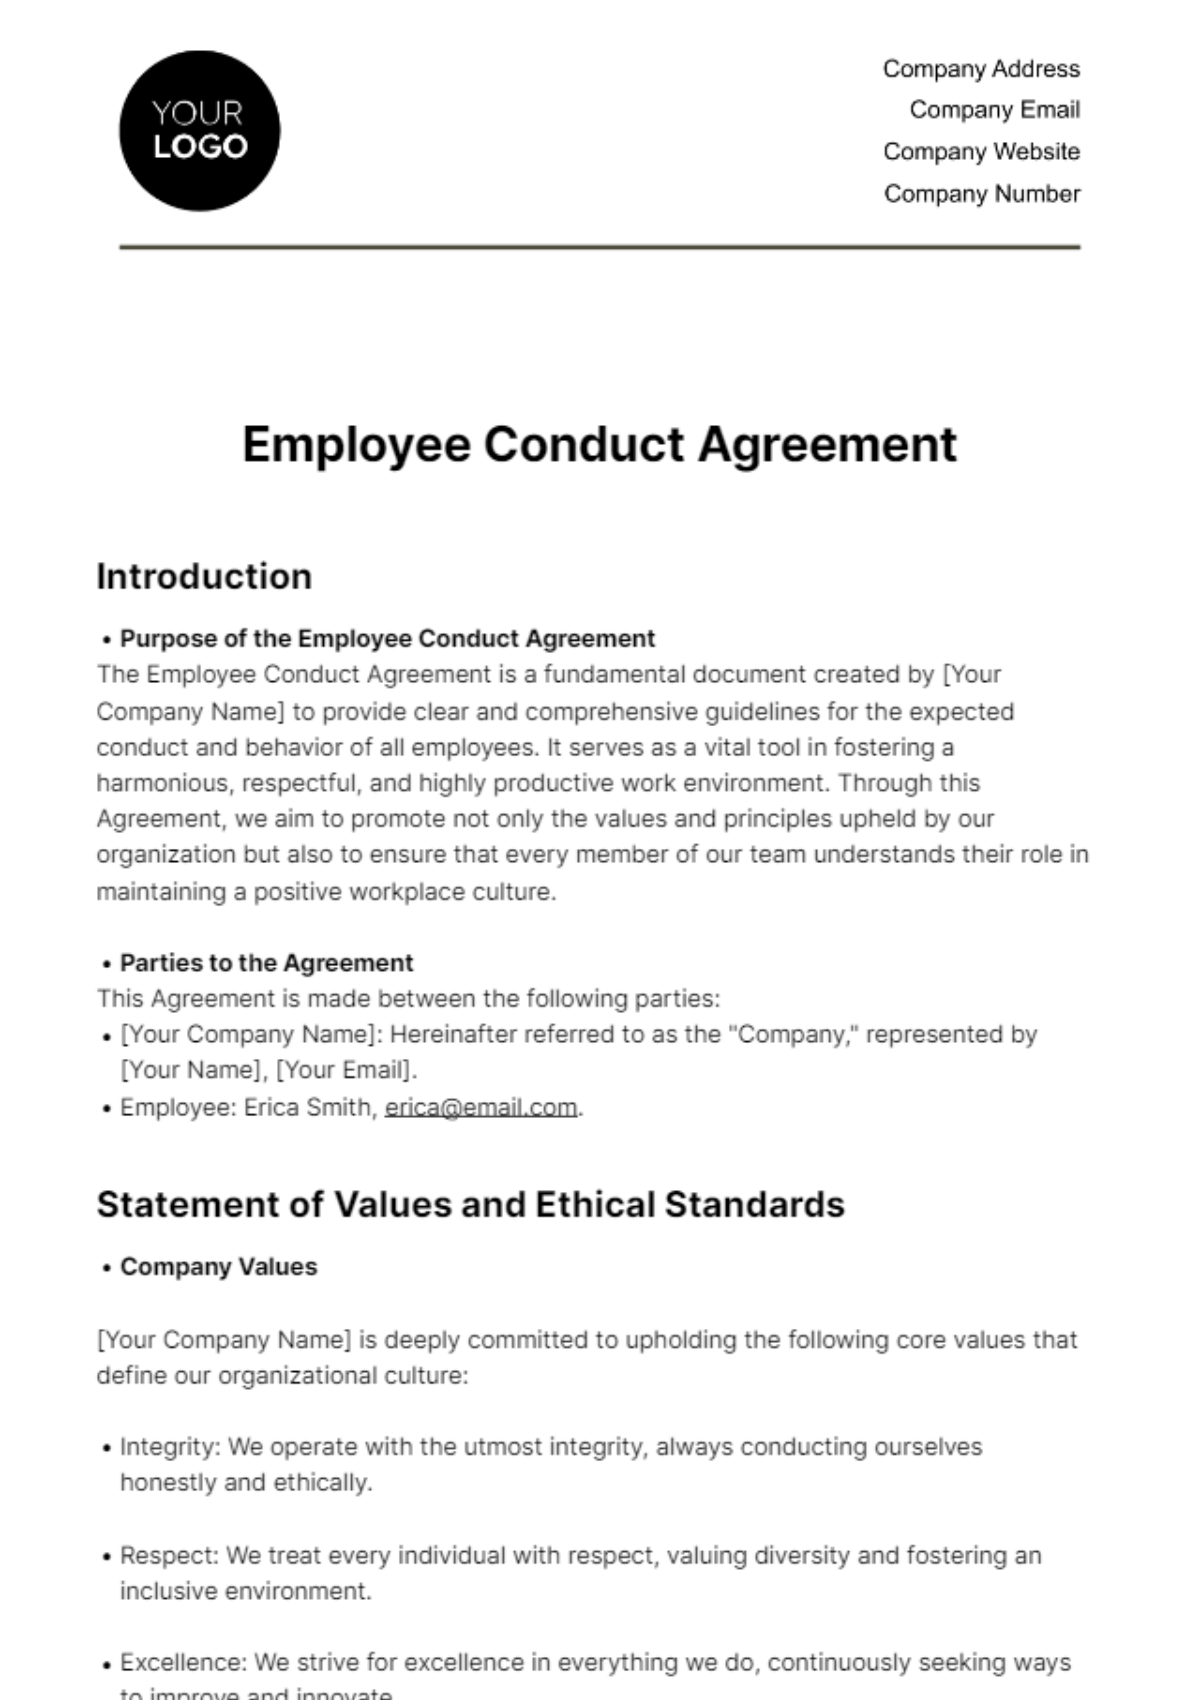 Free Employee Conduct Agreement HR Template